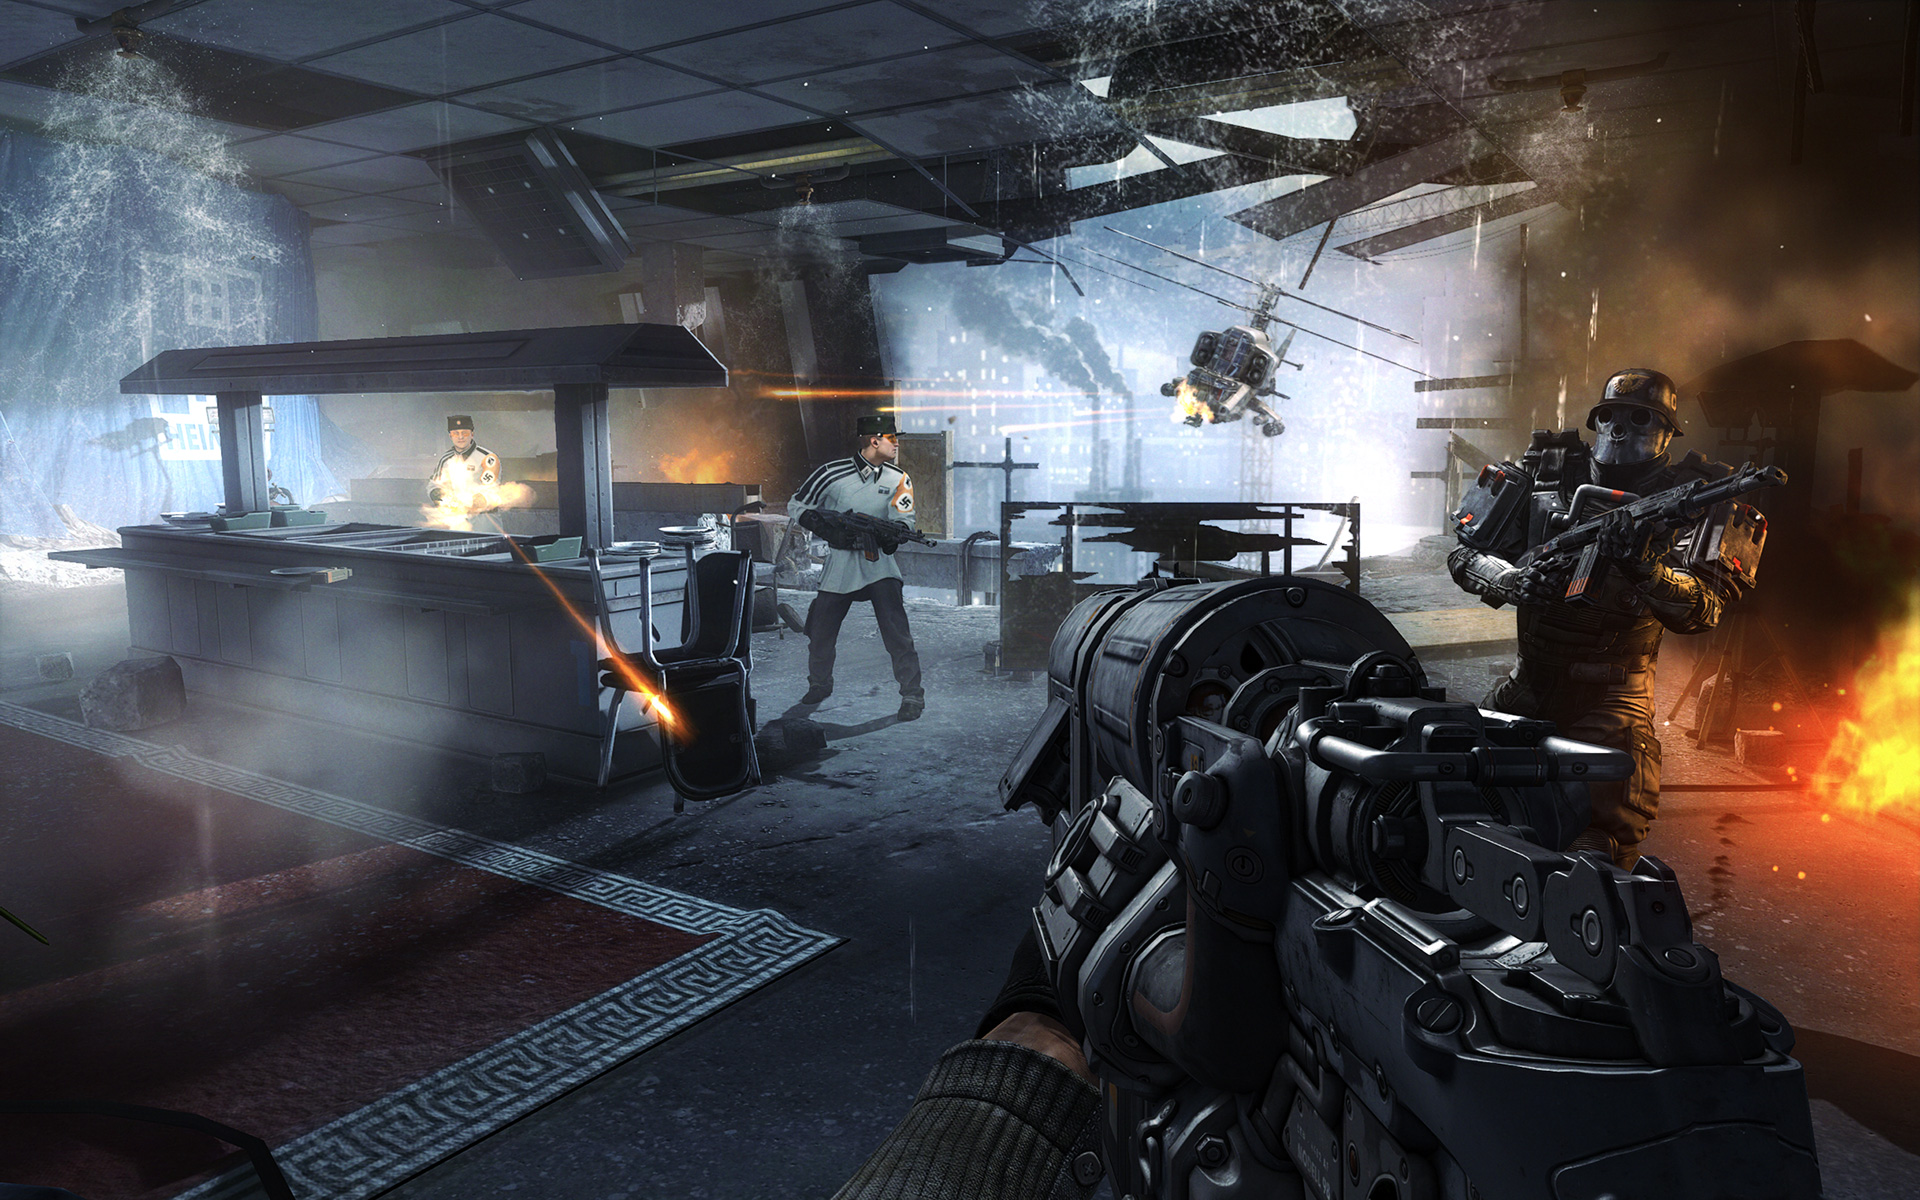 Screenshot for the game Wolfenstein: The New Order [1.0.0.2 (35939)] (2014) PC | RePack от R.G. Механики